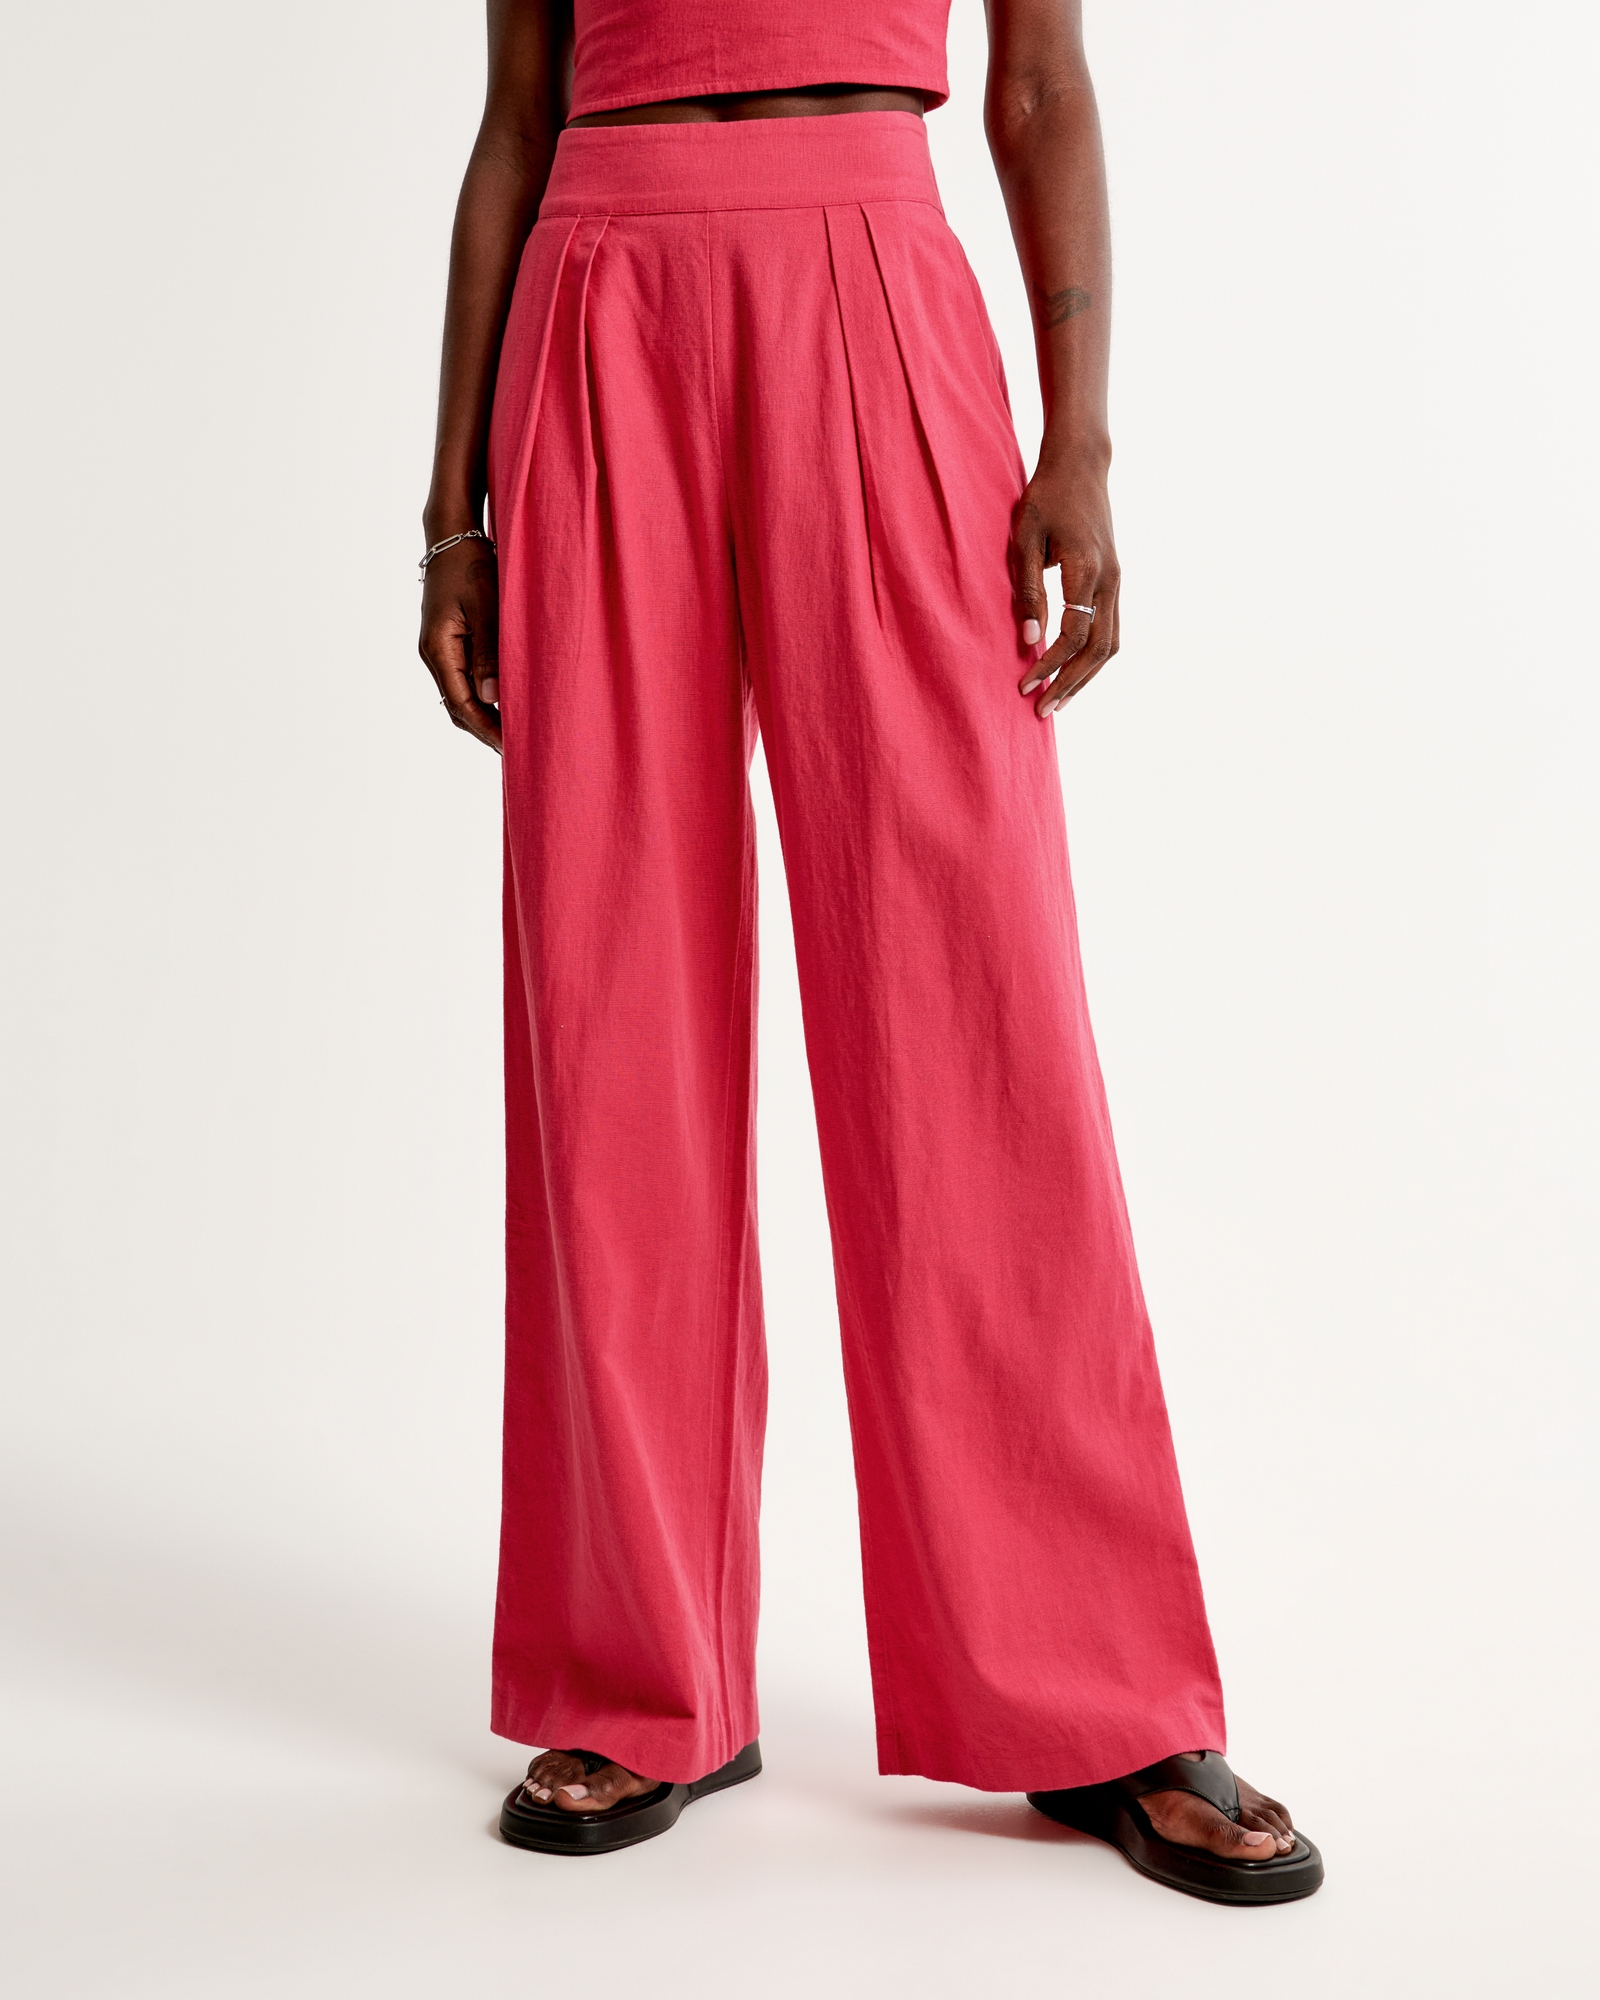 VEKDONE Under 100 Dollars Wide Leg Linen Pants for Women Overstock Items  Clearance All Prime